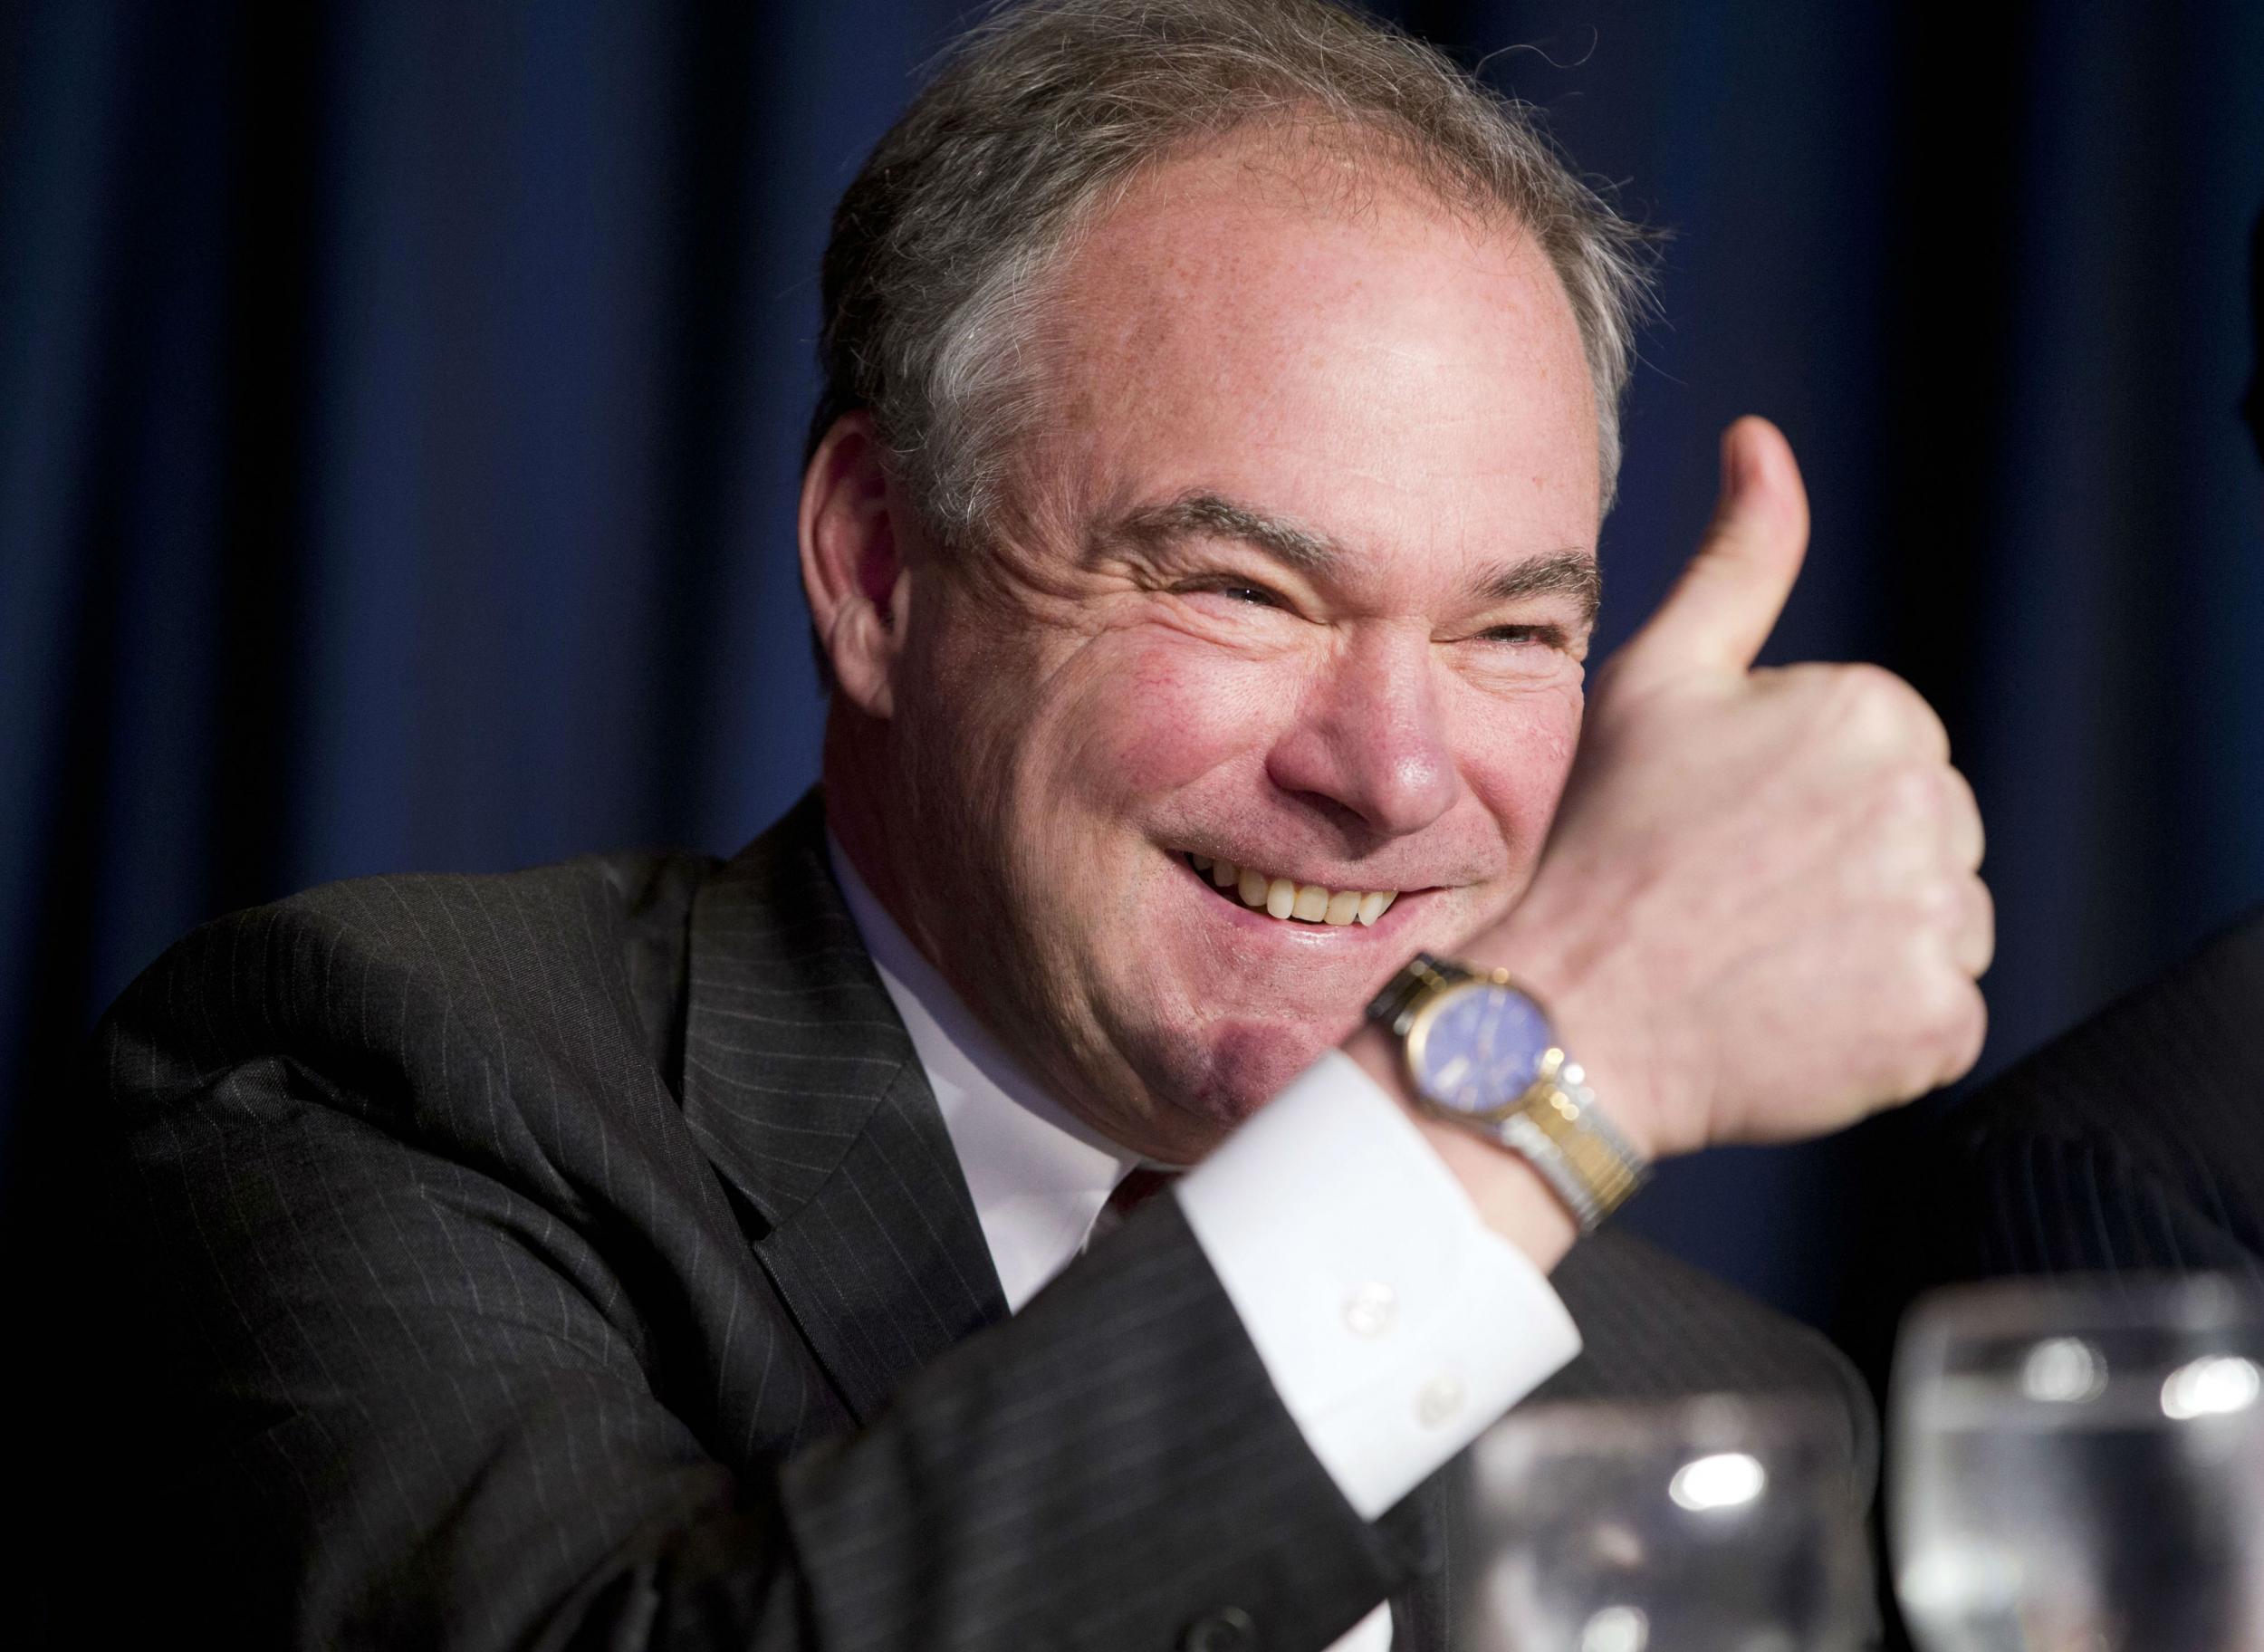 Tim Kaine once described himself as the most boring man in politics